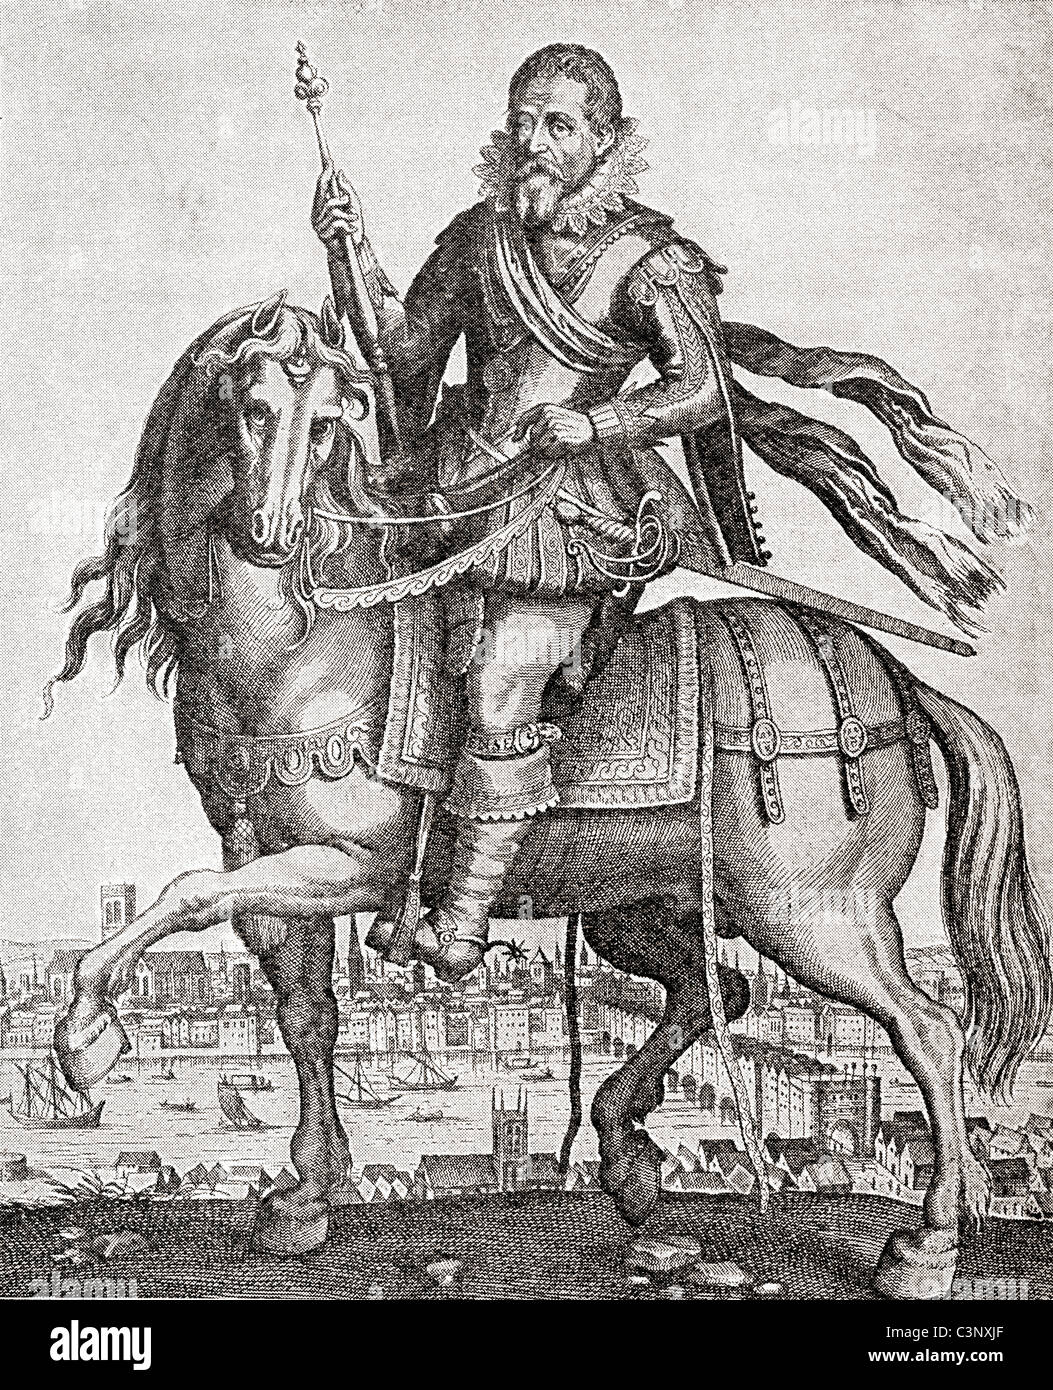 James I on horseback, with a view of London behind. Stock Photo